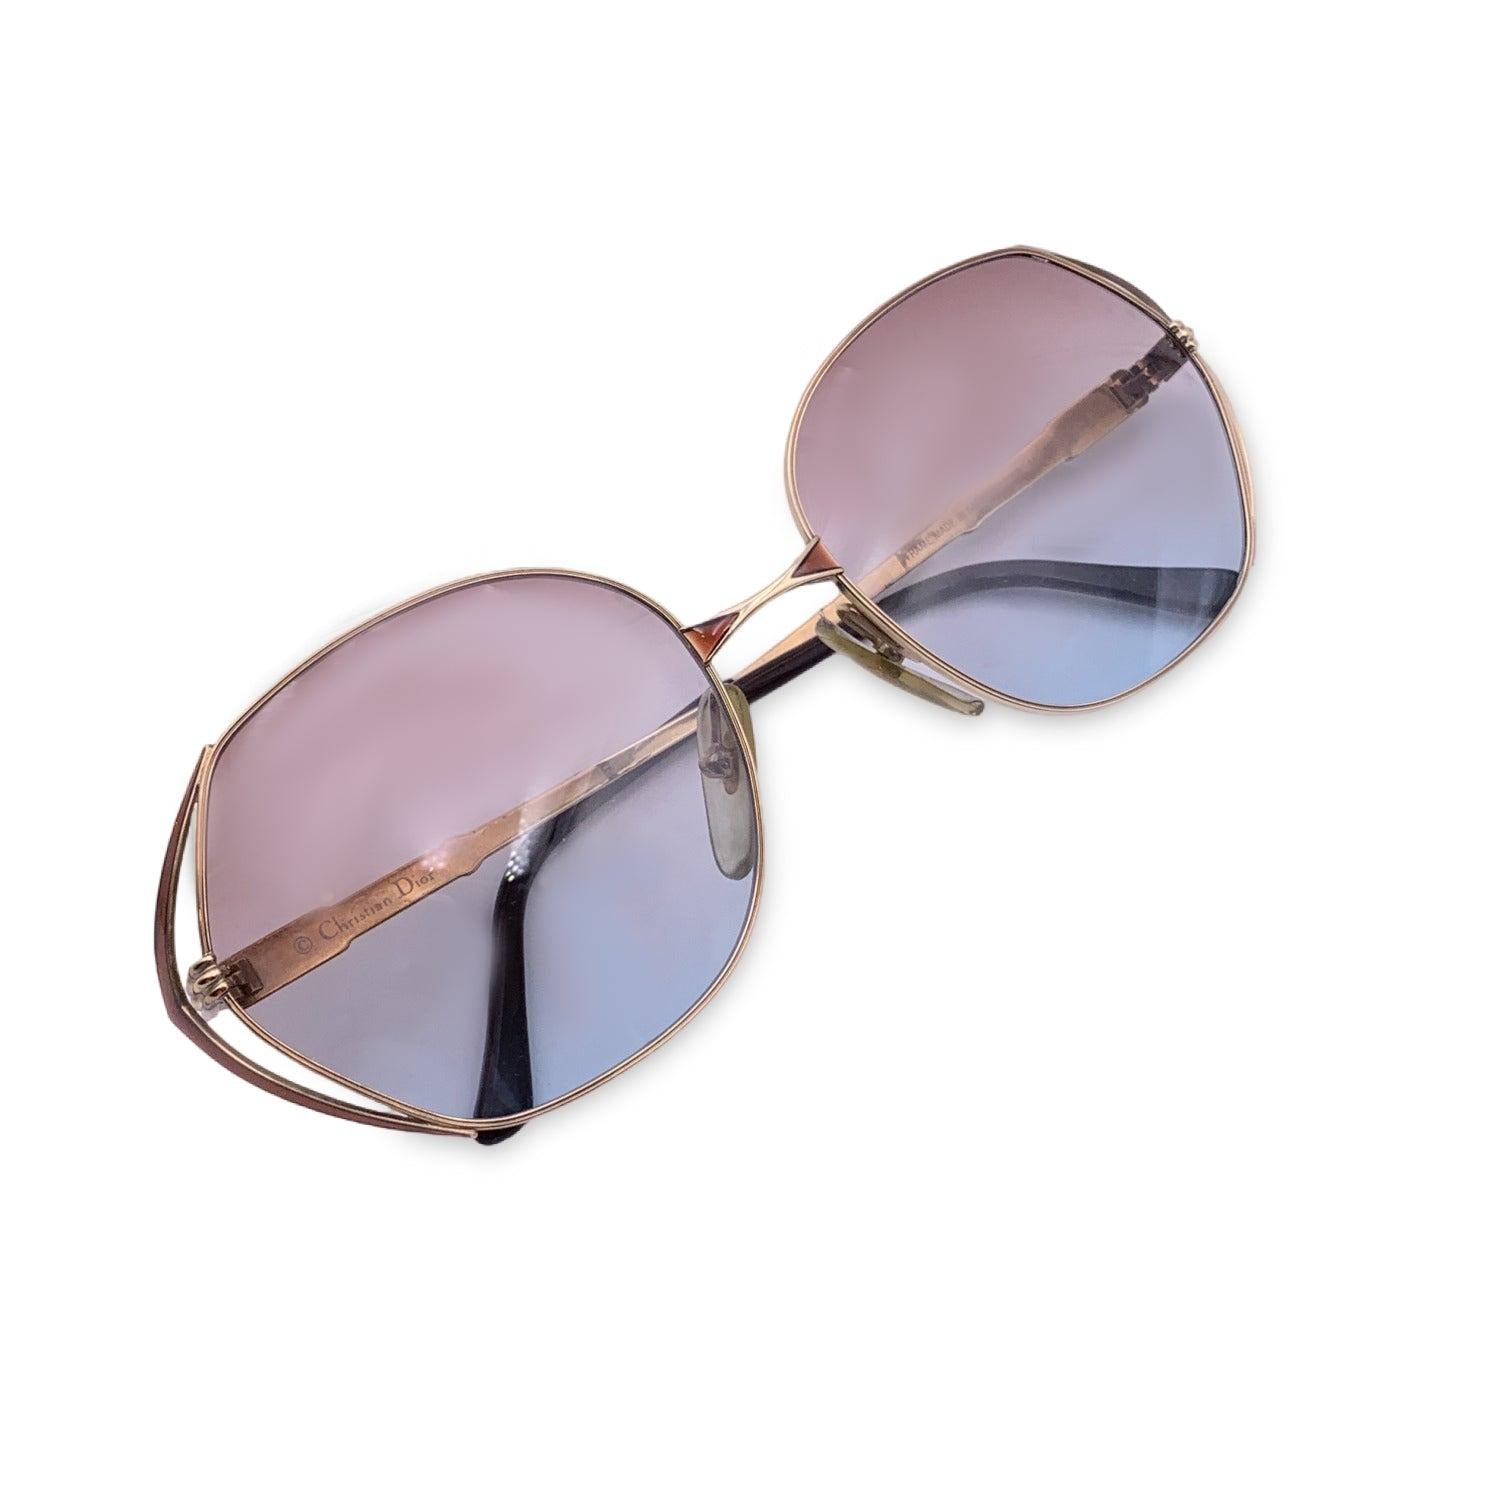 Vintage Christian Dior Women Sunglasses, Mod. 2302 41. Size: 56/17 125mm. Gold metal frame, with brown gold geometrical triangles at the side of the frame. Gold CD logo con temples . 100% Total UVA/UVB protection. From brown to light blue gradient